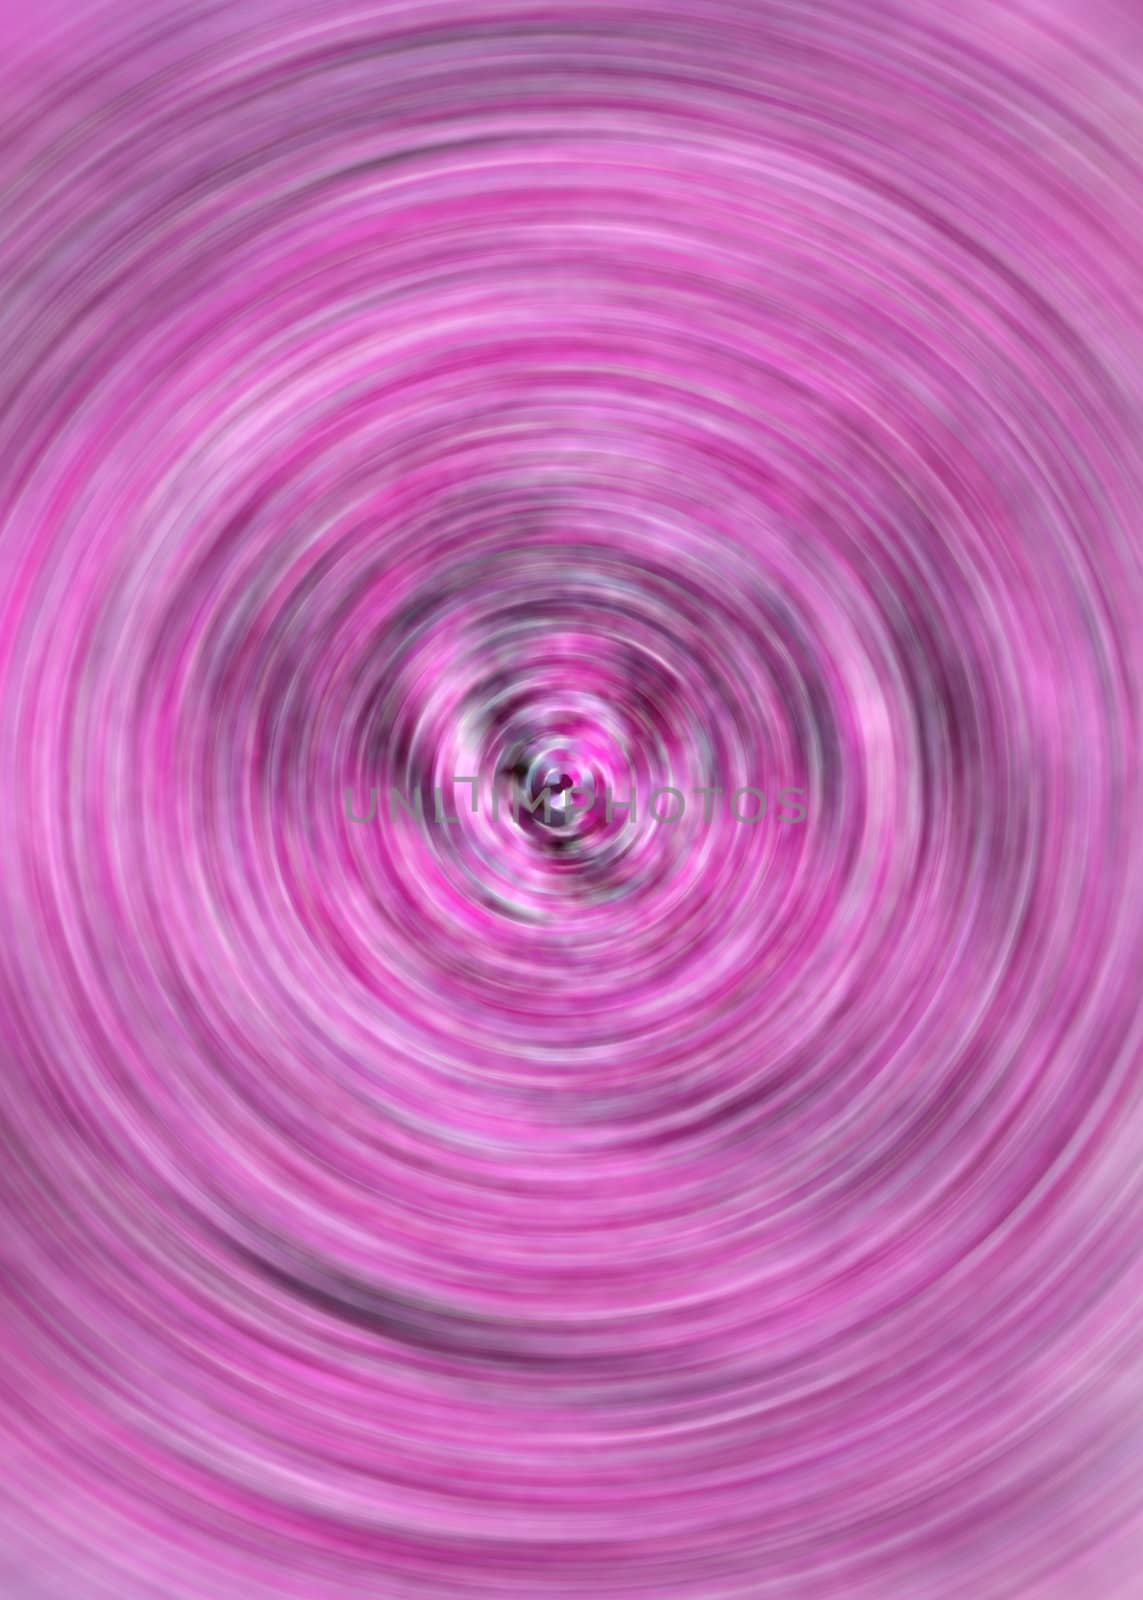 Pink and purple circular tunnel perspective illustration